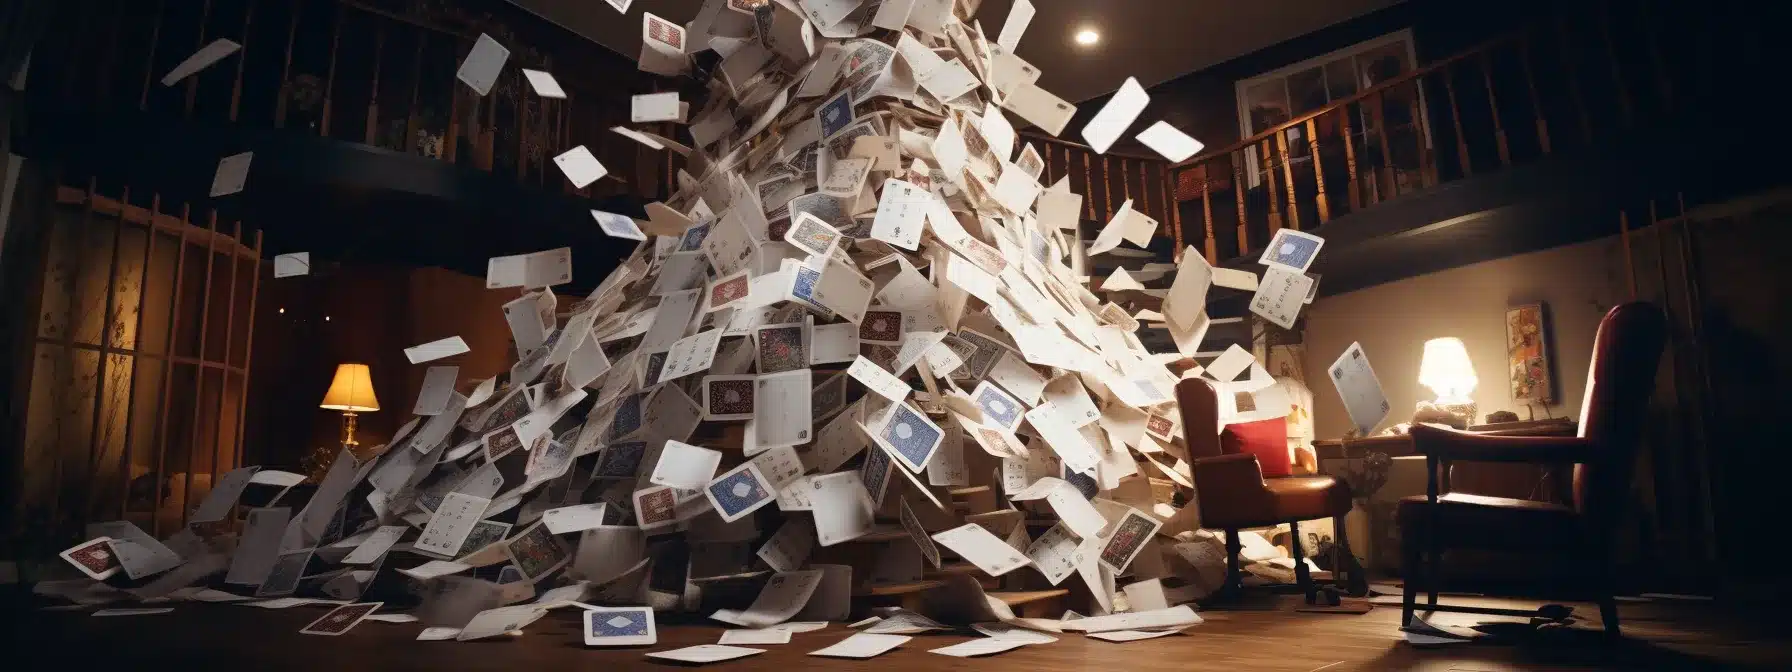 A Towering House Of Cards Collapses With A Single Negative Testimonial.